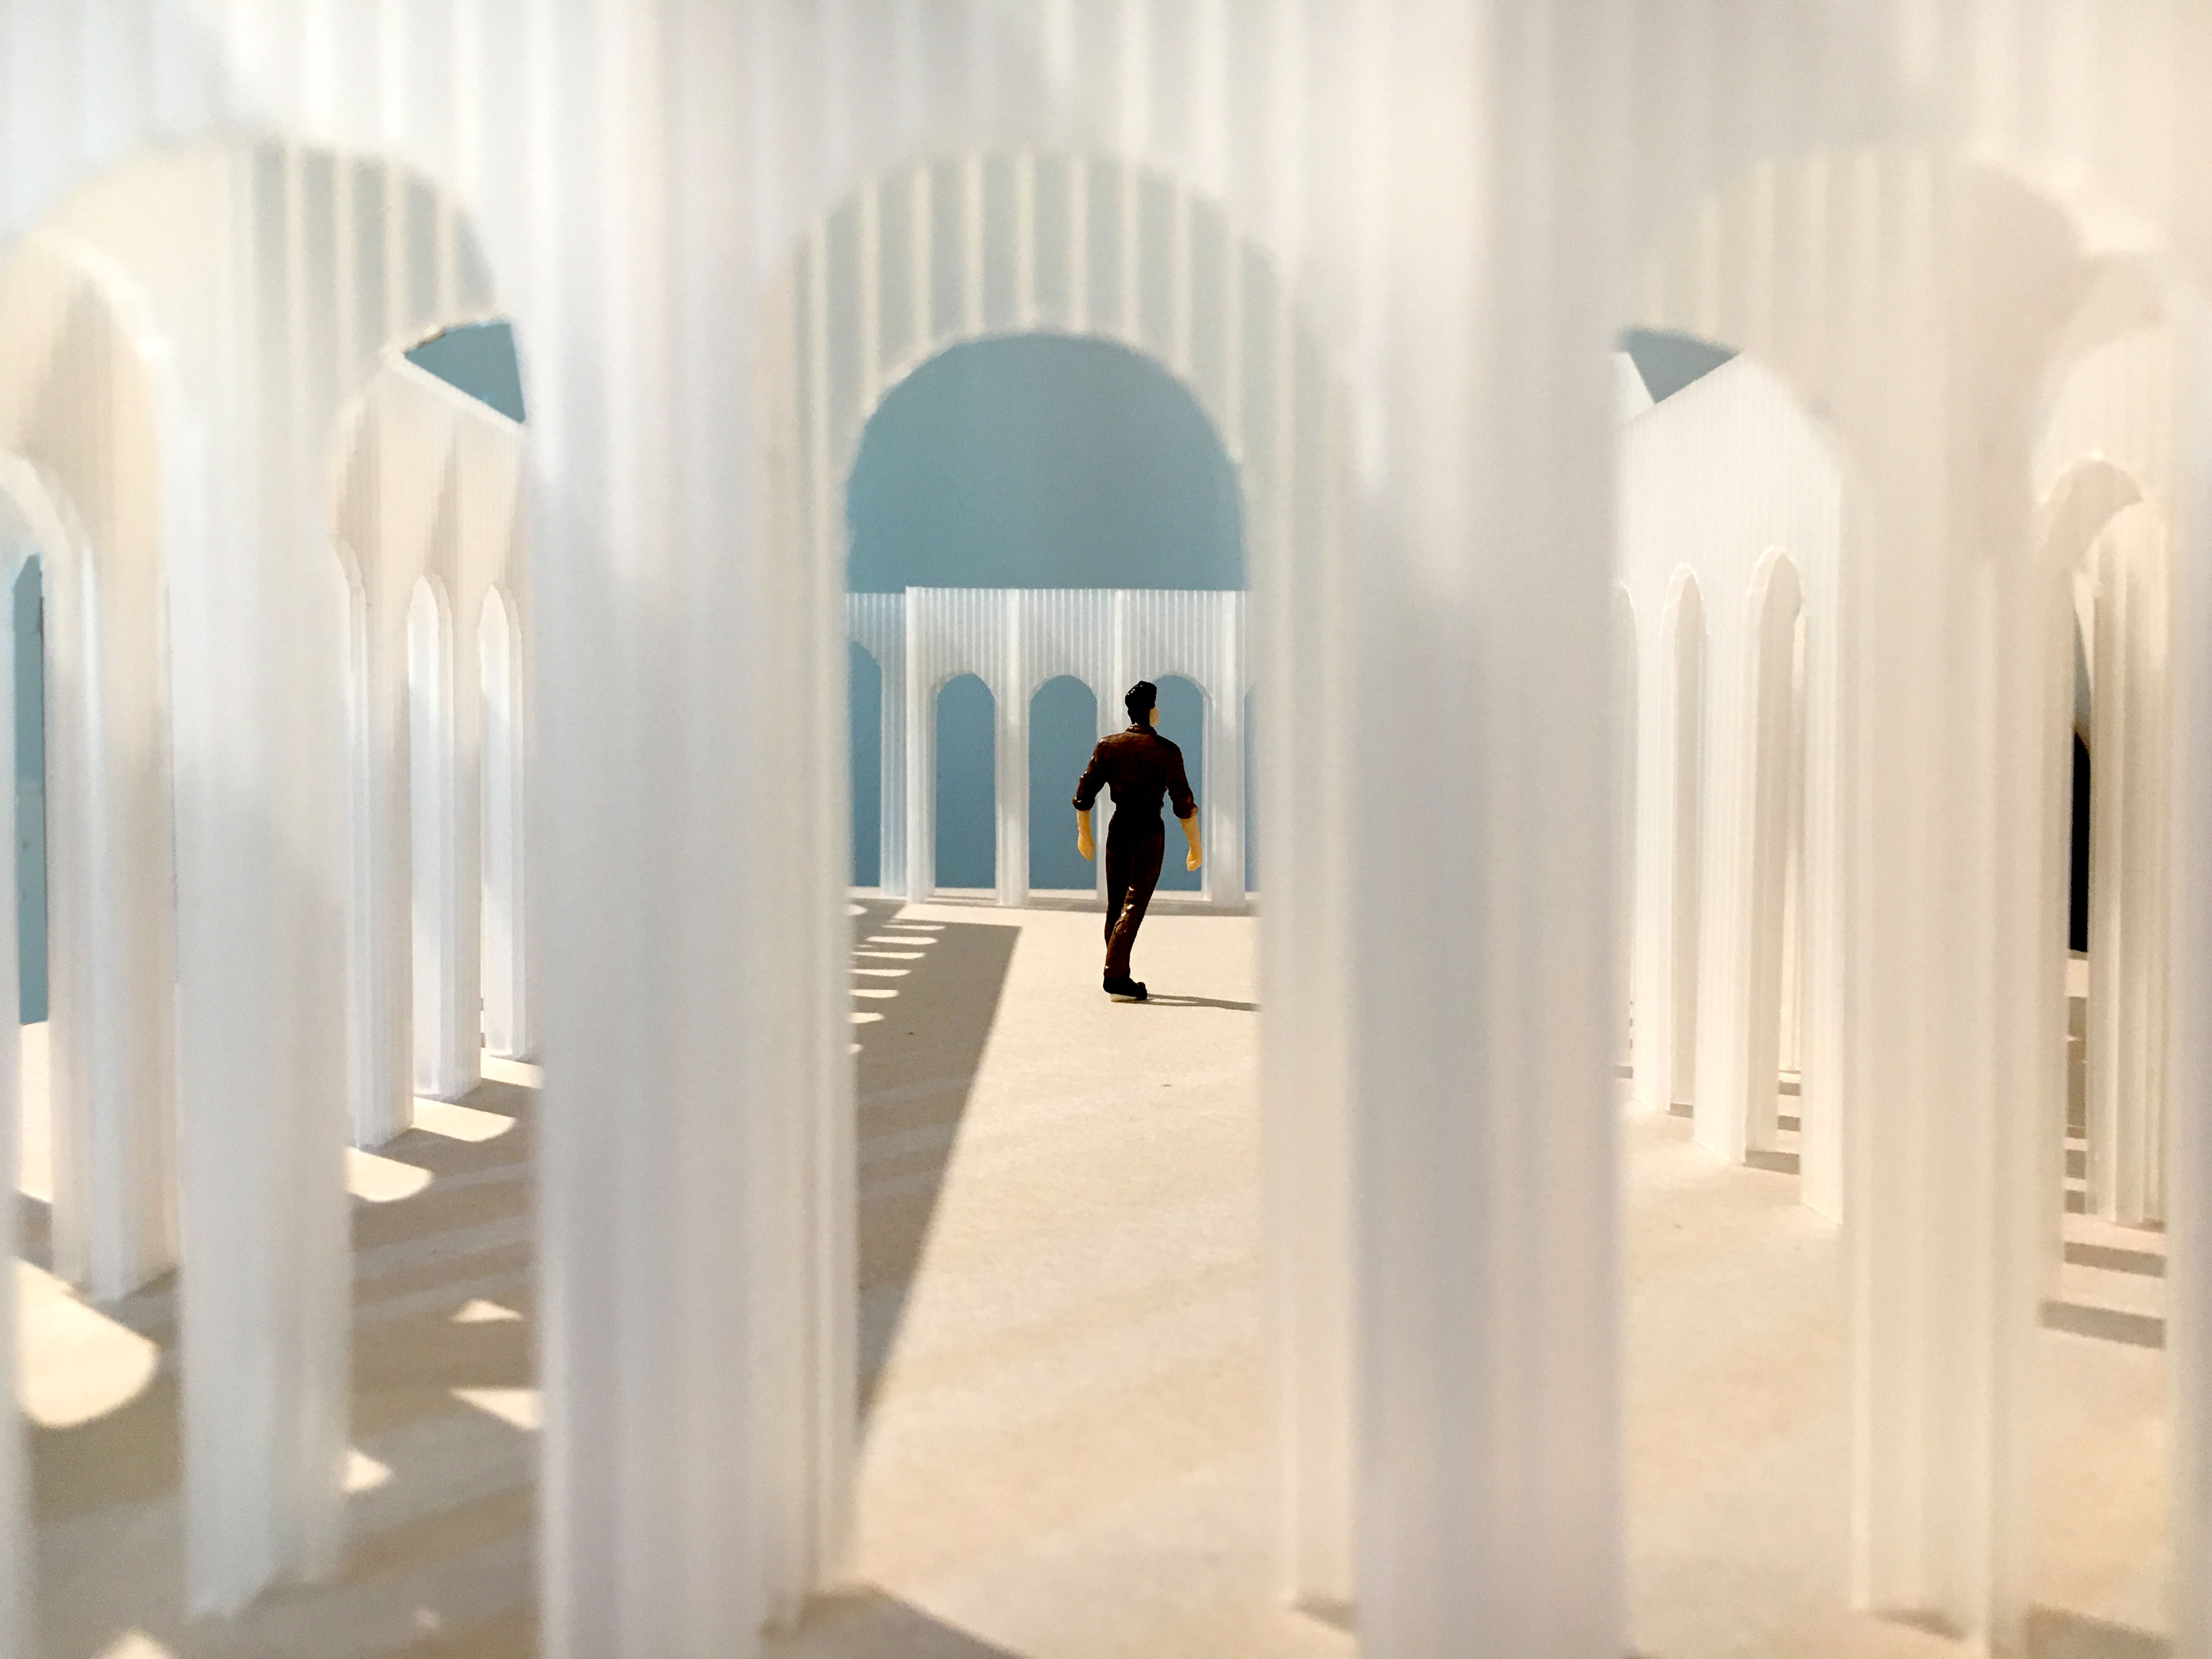 Conceptual image depicting man within translucent arches